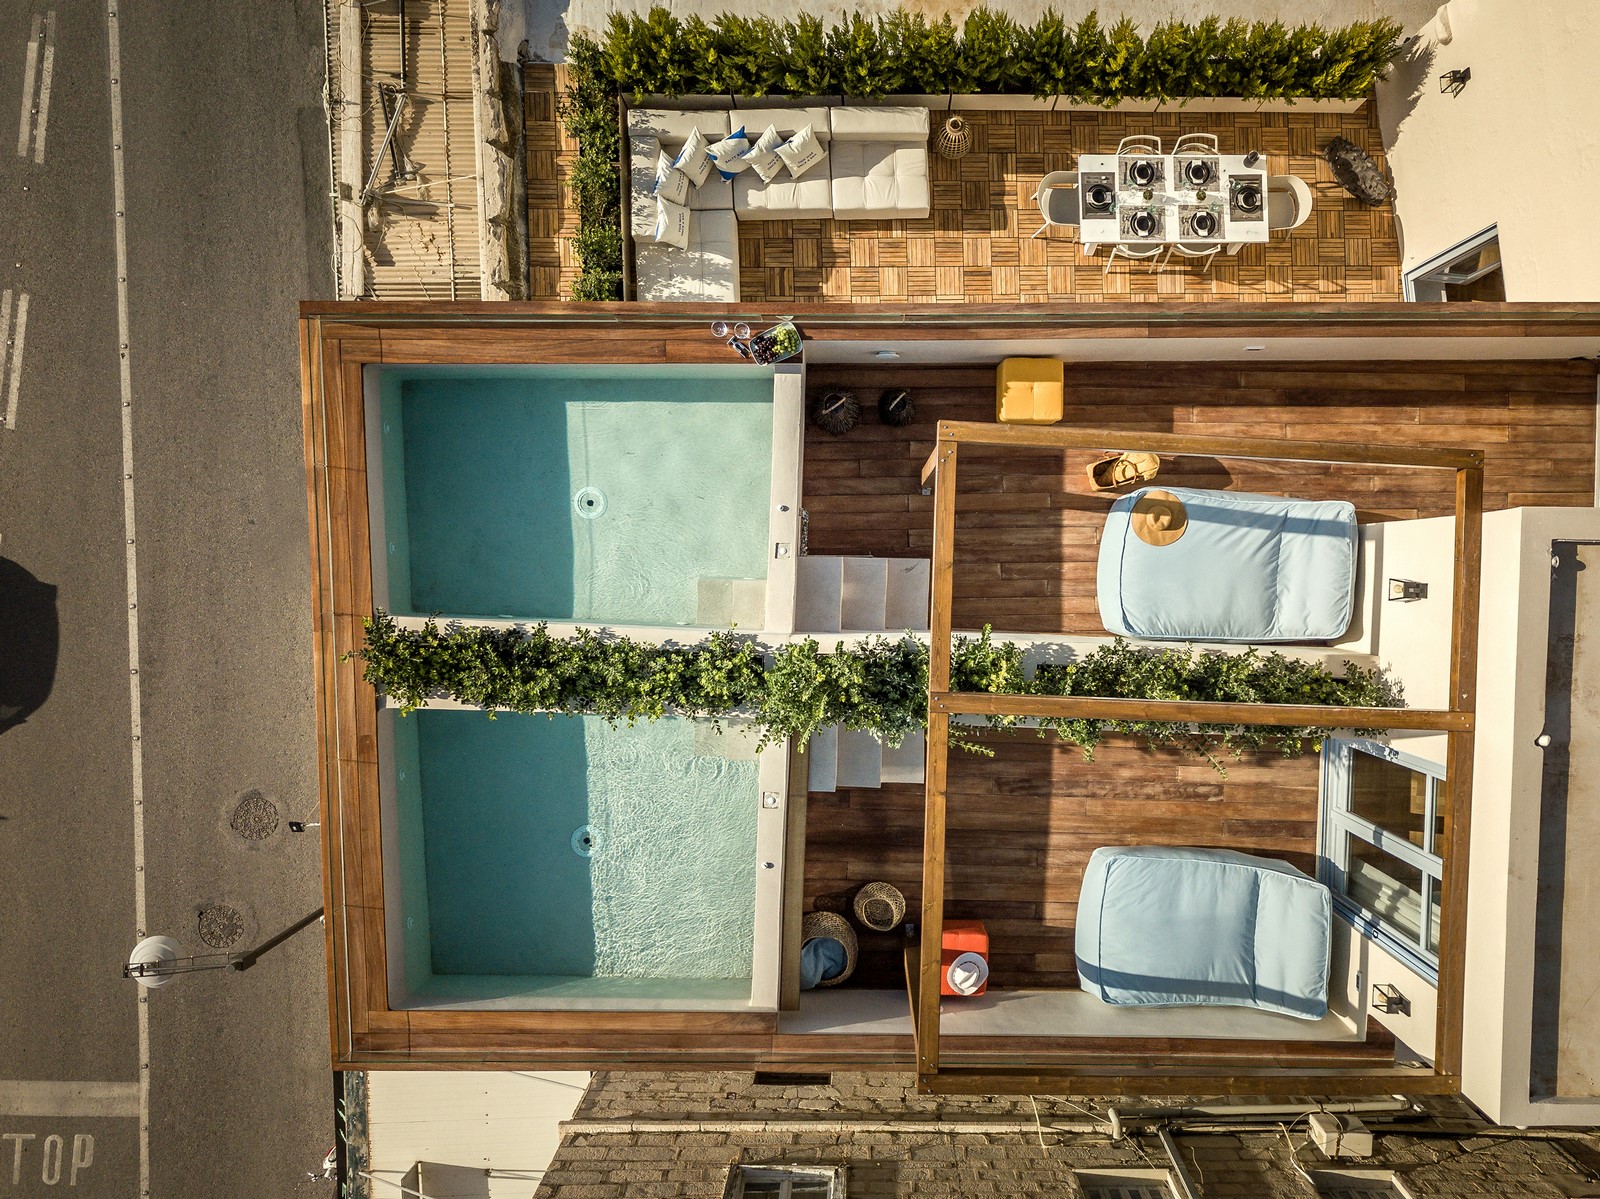 Archisearch Shapes Luxury Suites in Syros  |  Human Point